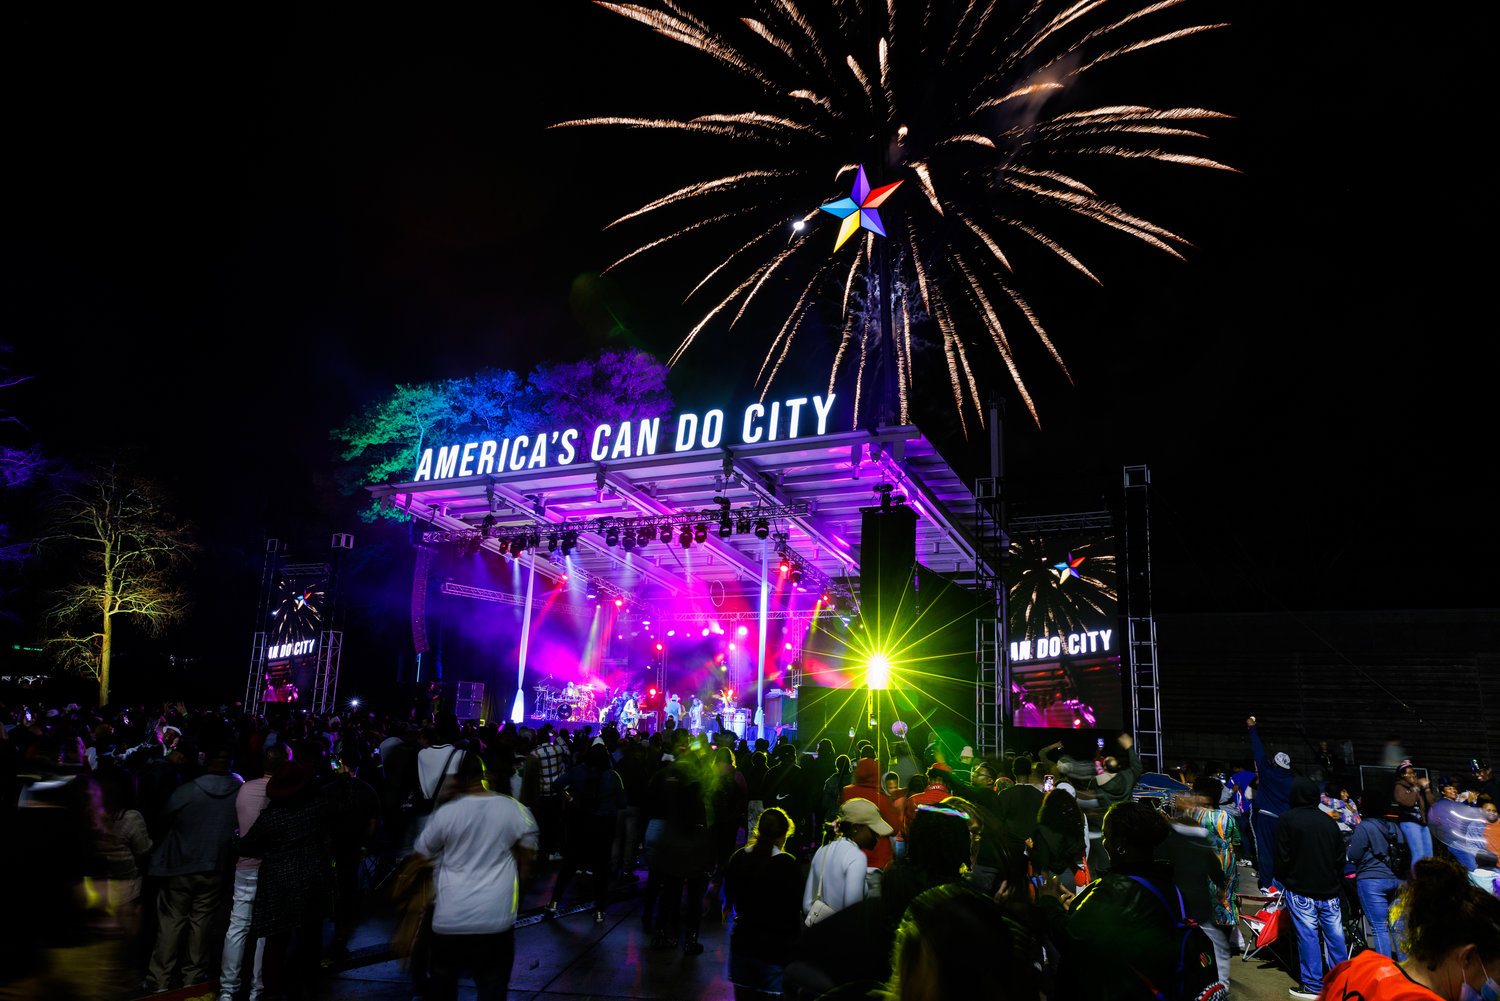 Fireworks and the ascension of the city star helped revelers at Night Circus: A District New Year’s Eve Spectacular welcome the new year at Festival Park on Saturday.